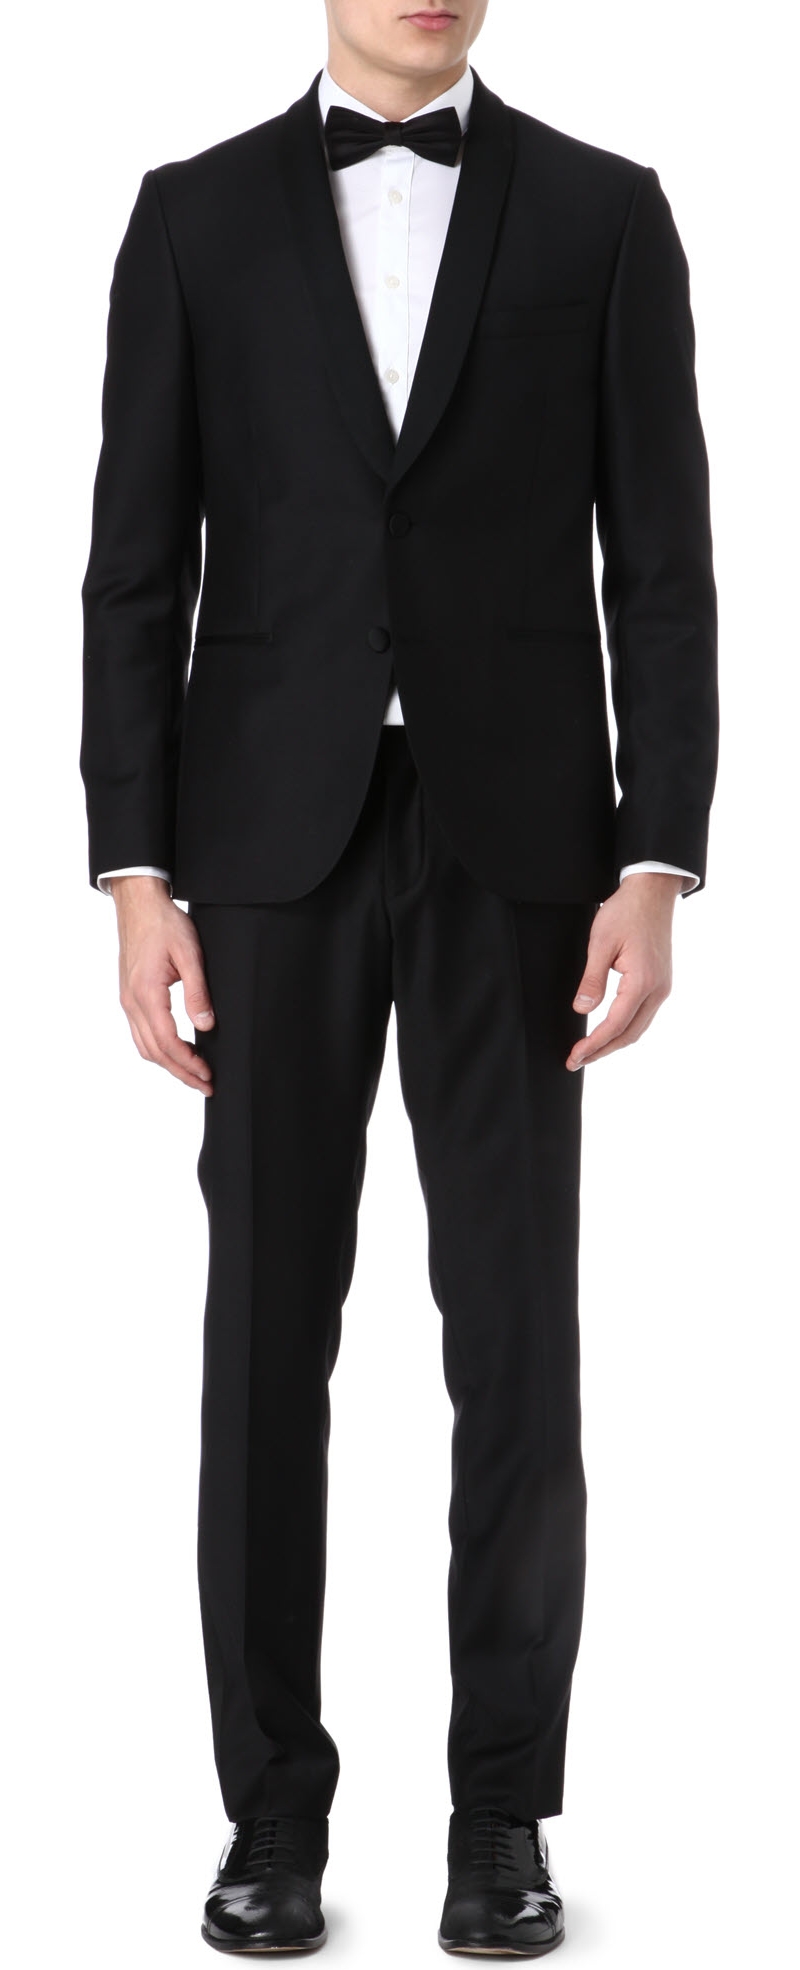 TIGER OF SWEDEN   Shawl collar wool tuxedo suit